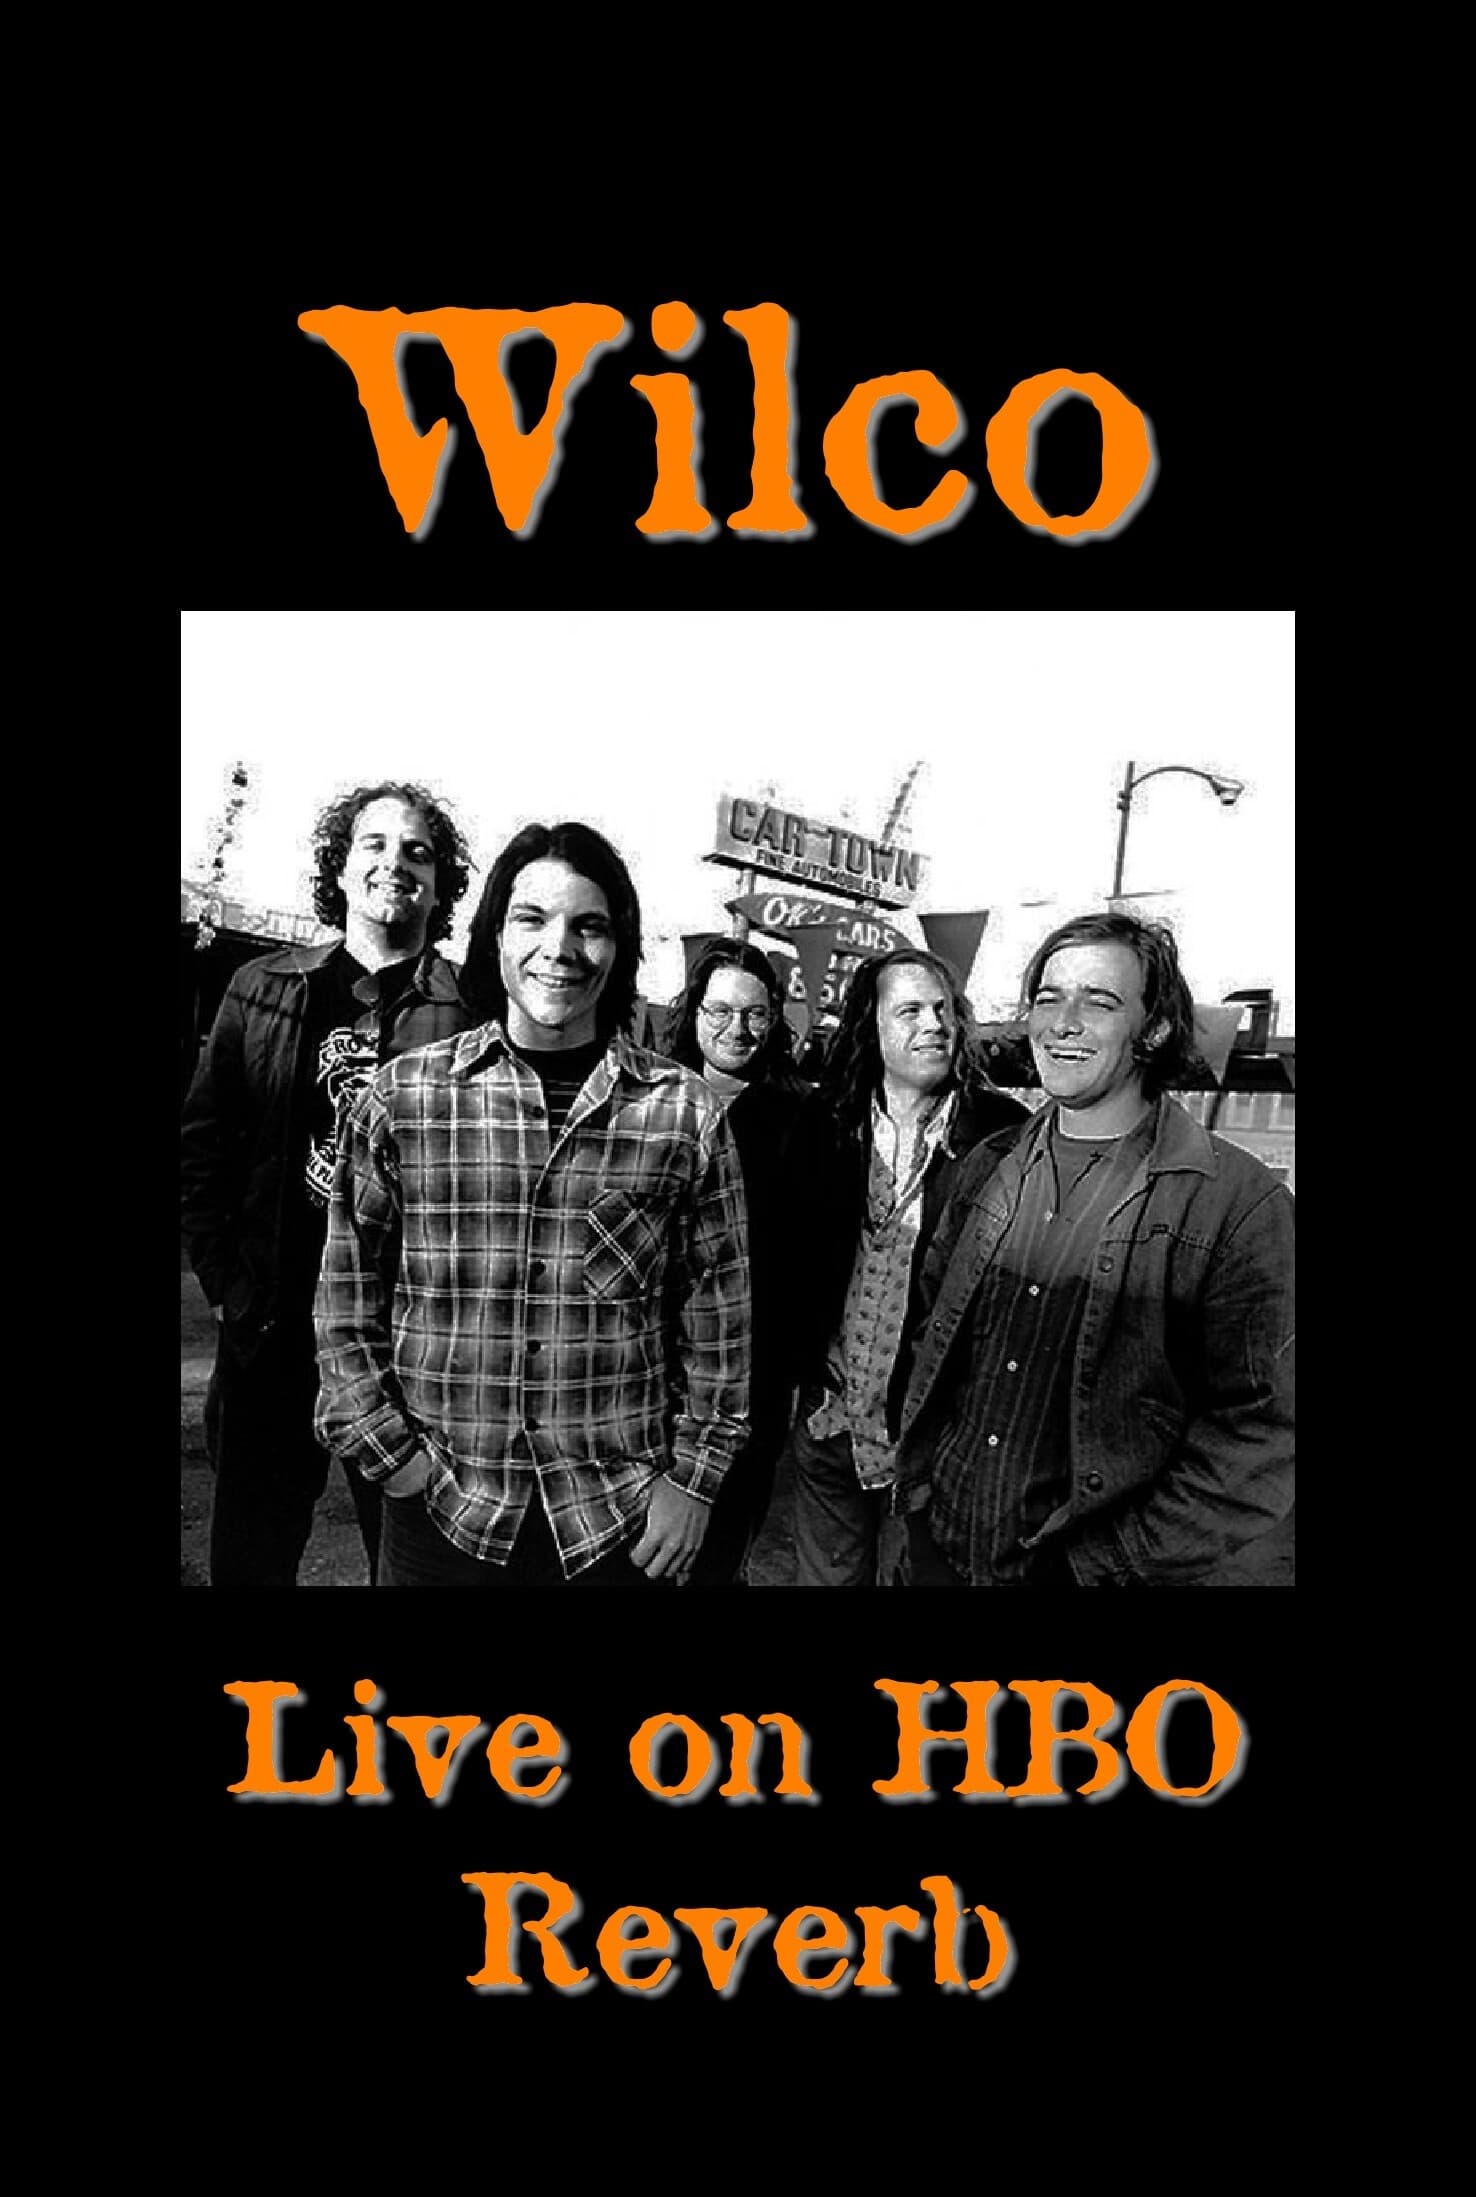 Wilco: Live on HBO Reverb